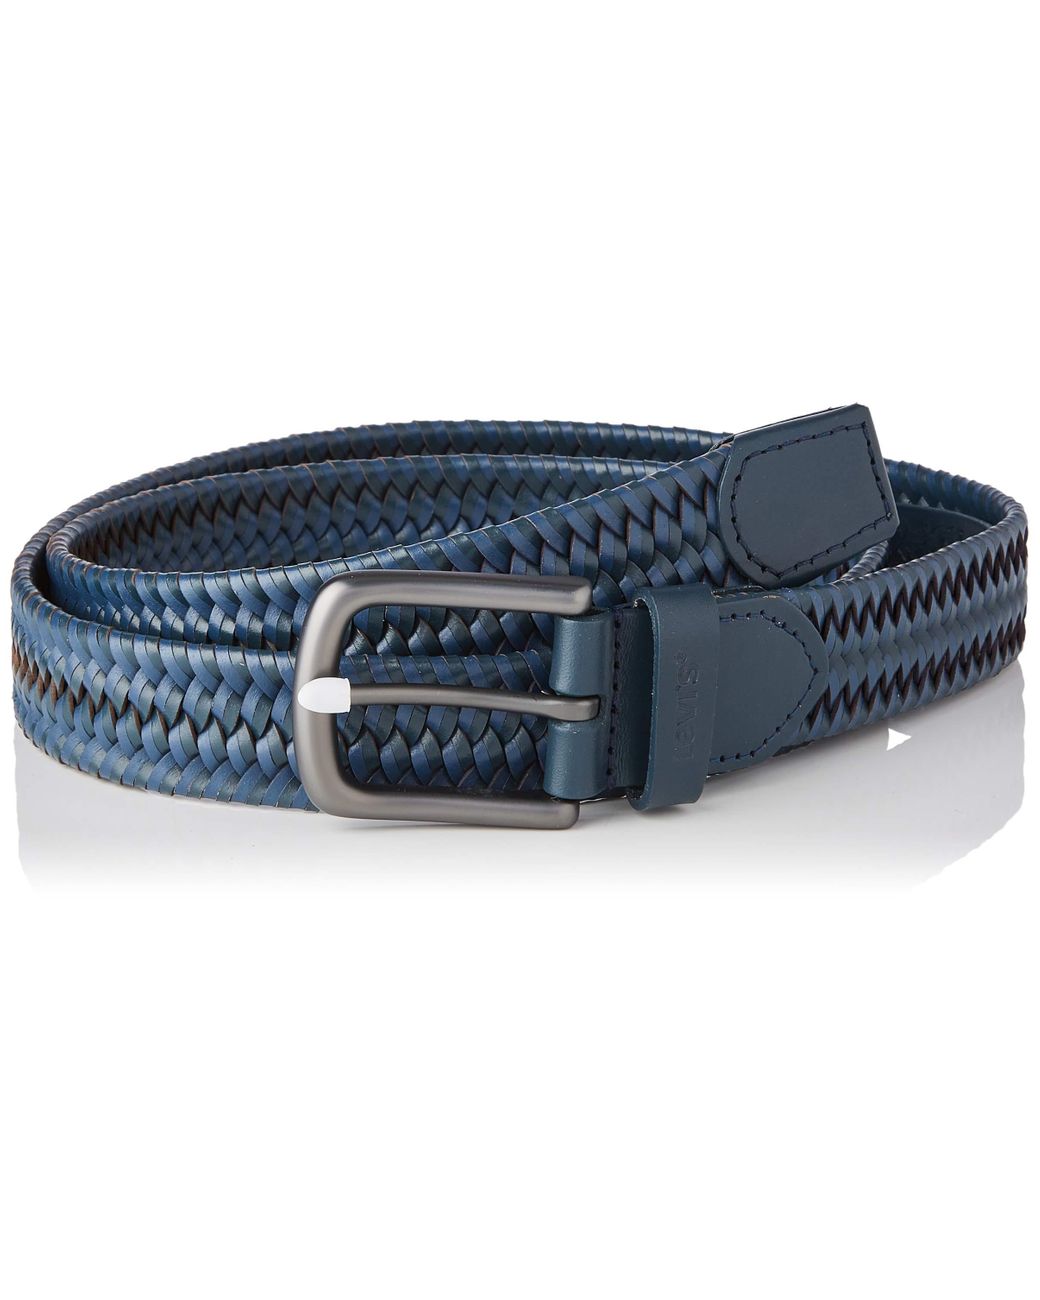 Levi's Woven Leather Stretch Belt in Brown (Black) for Men - Save 23% ...